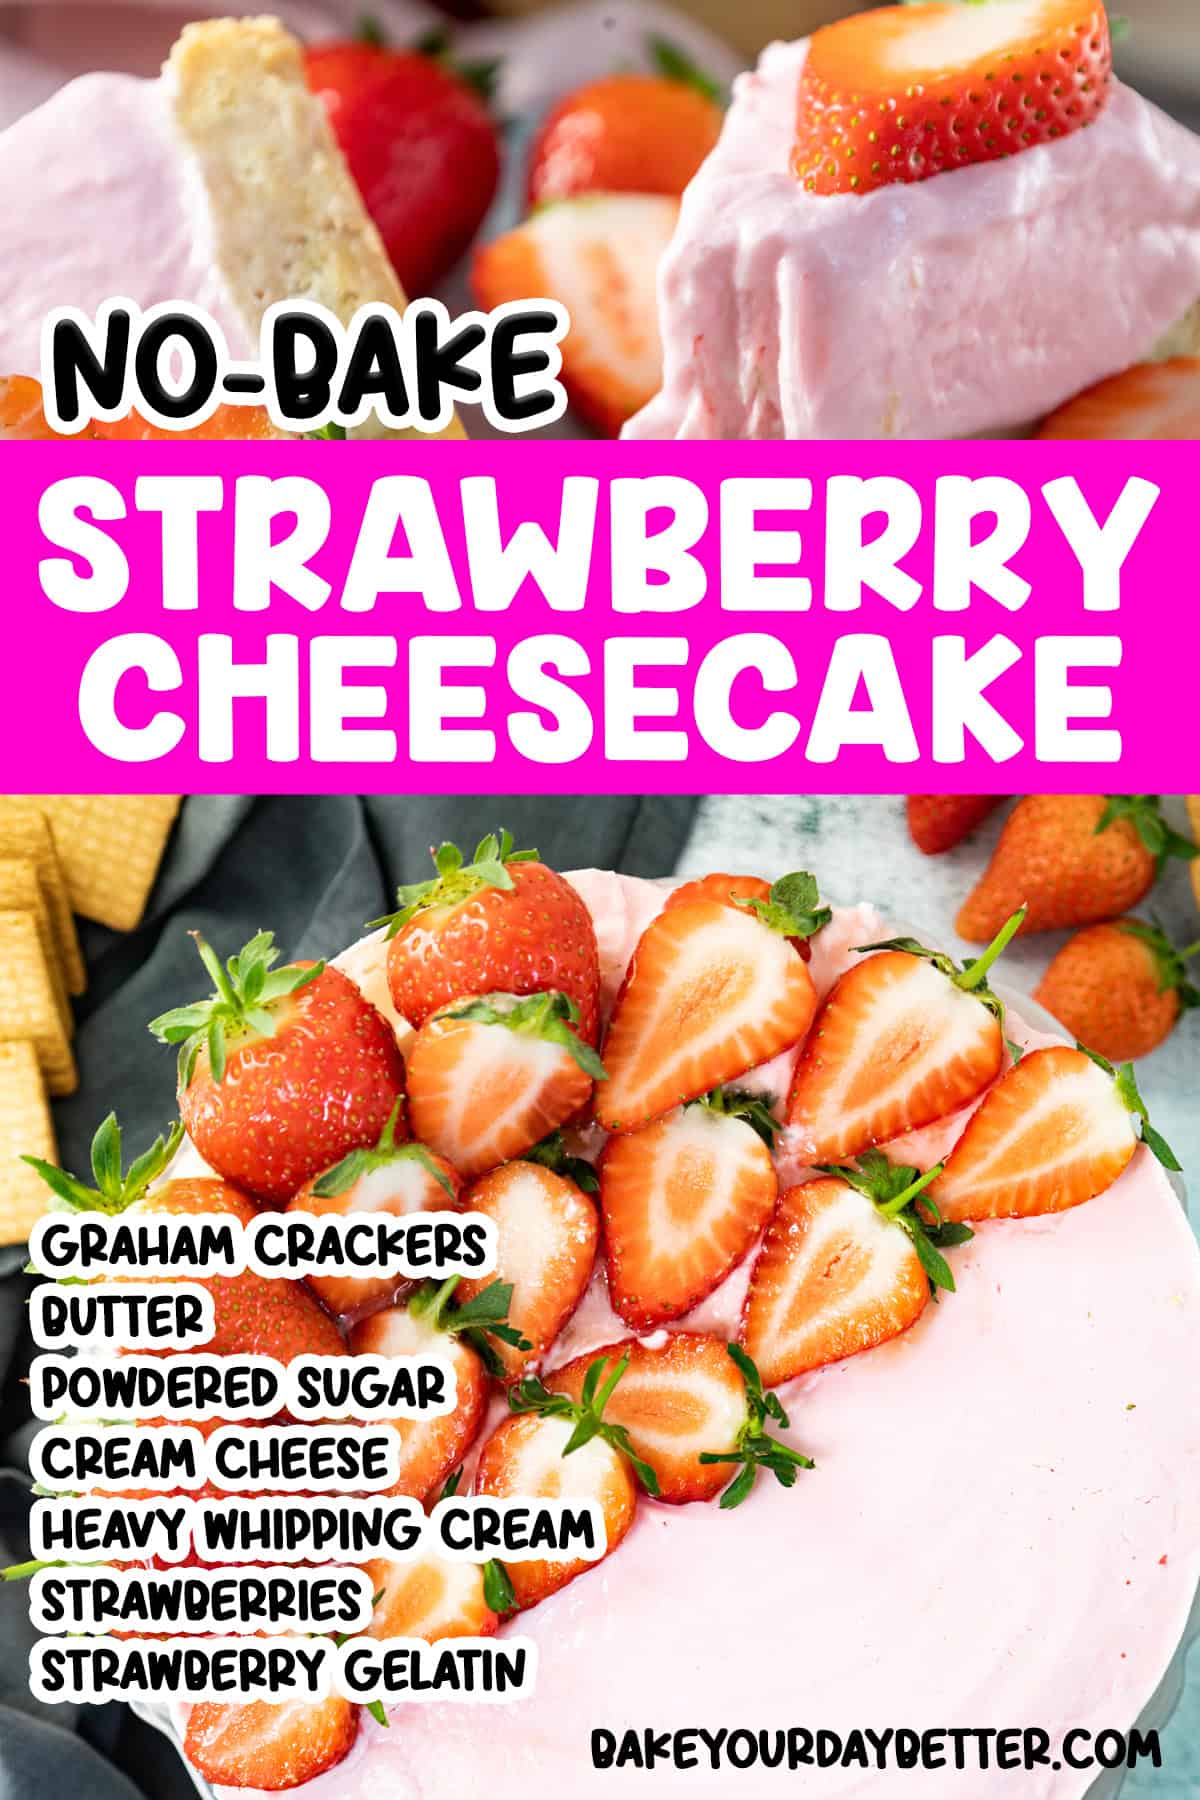 pictures of strawberry cheesecake with text overlay that says: no-bake strawberry cheesecake and a list of ingredients